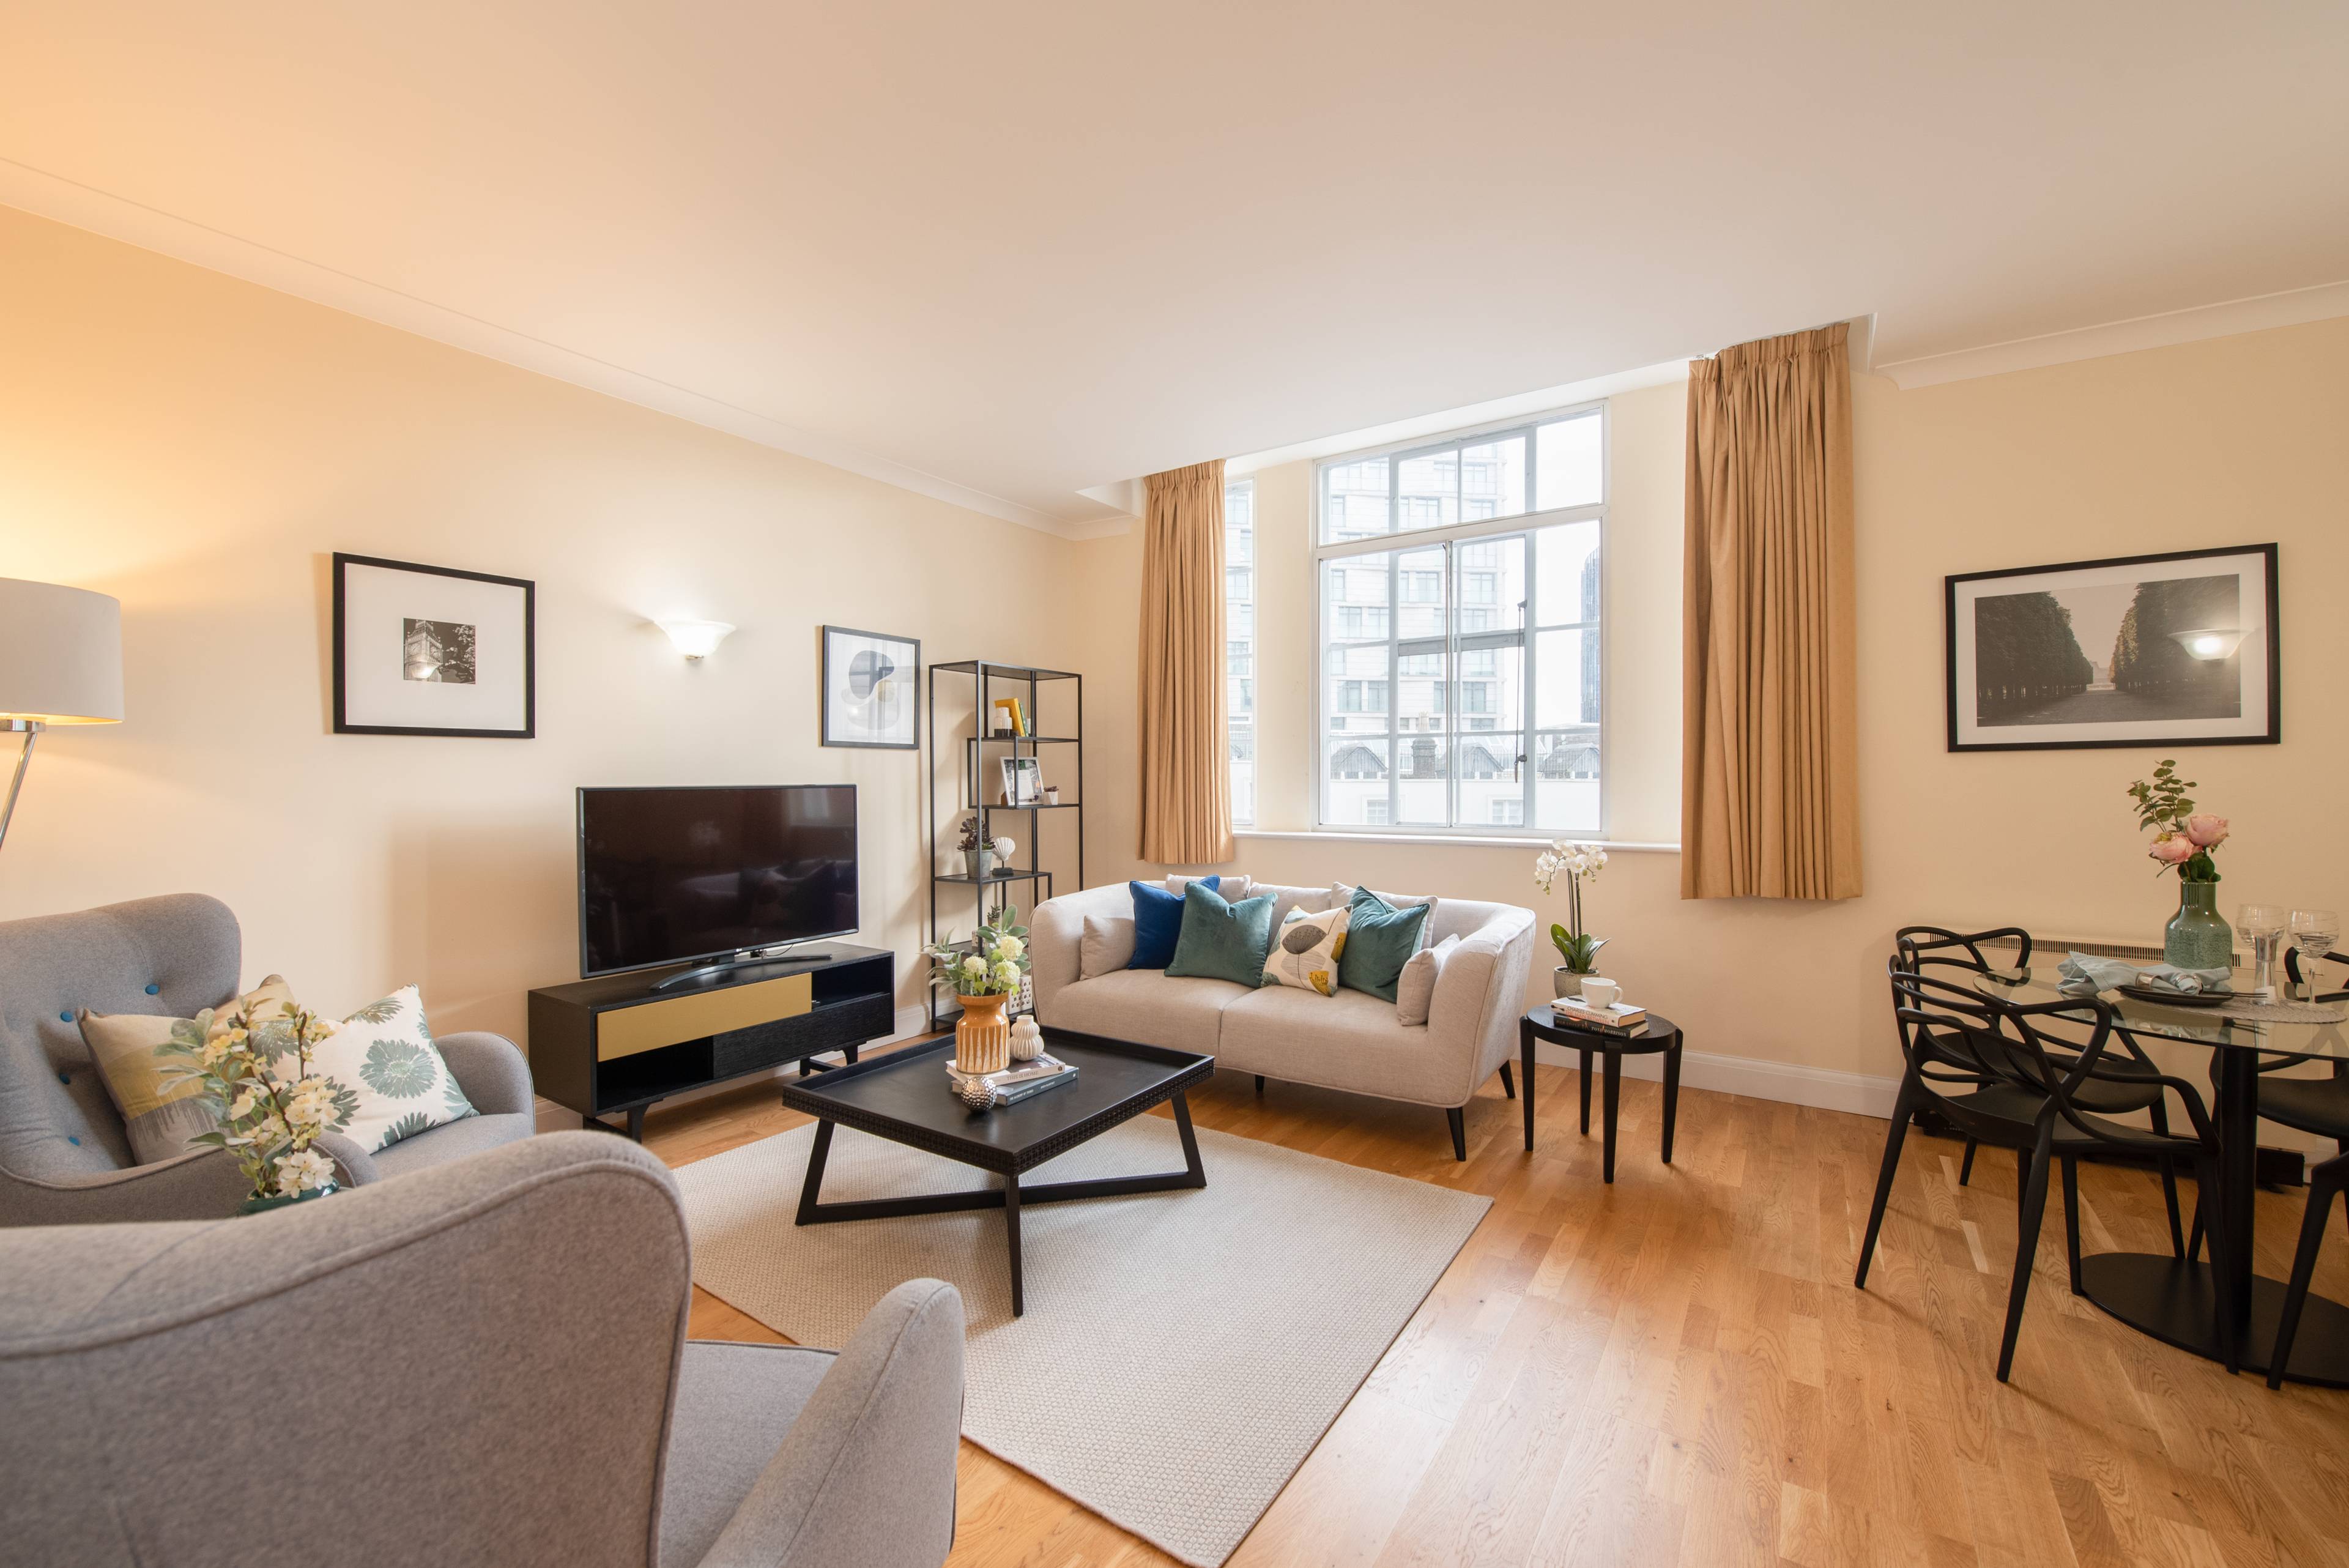 Great opportunity to purchase a bright, south facing and spacious apartment on the 3rd floor of sought after County Hall Apartments by the London Eye.